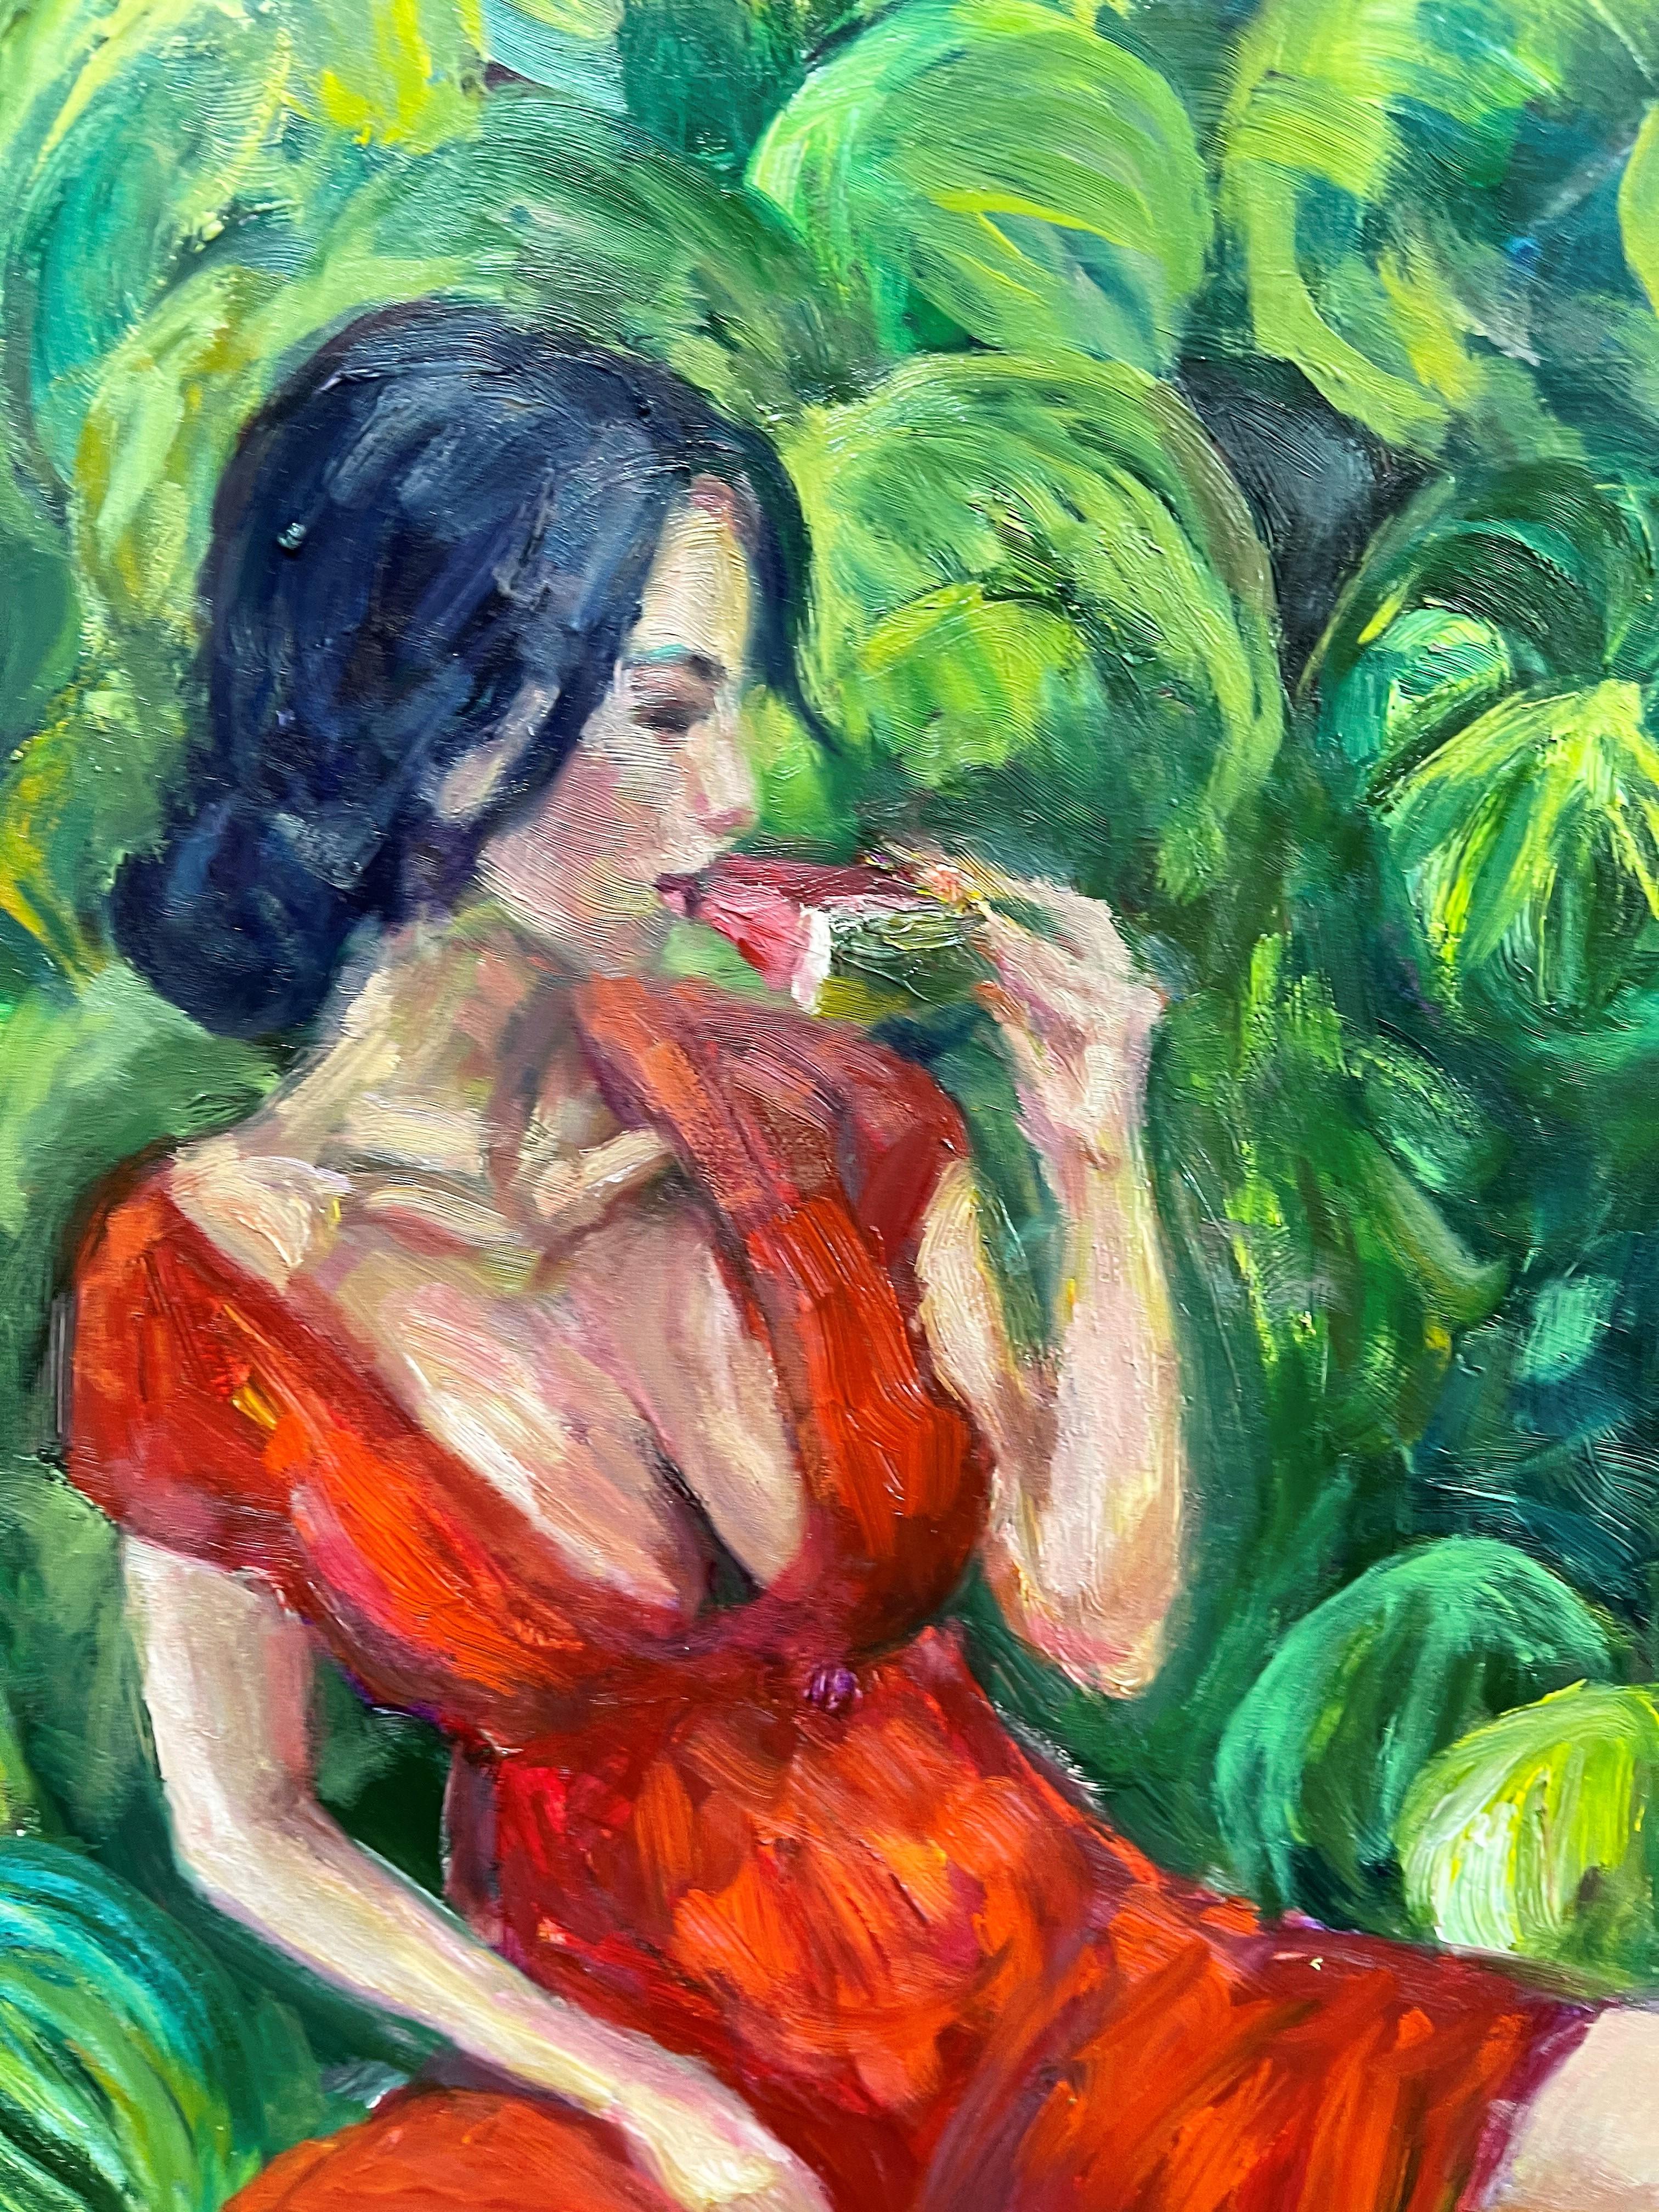 Girl with watermelons - Brown Portrait Painting by  Kateryna Krivchach